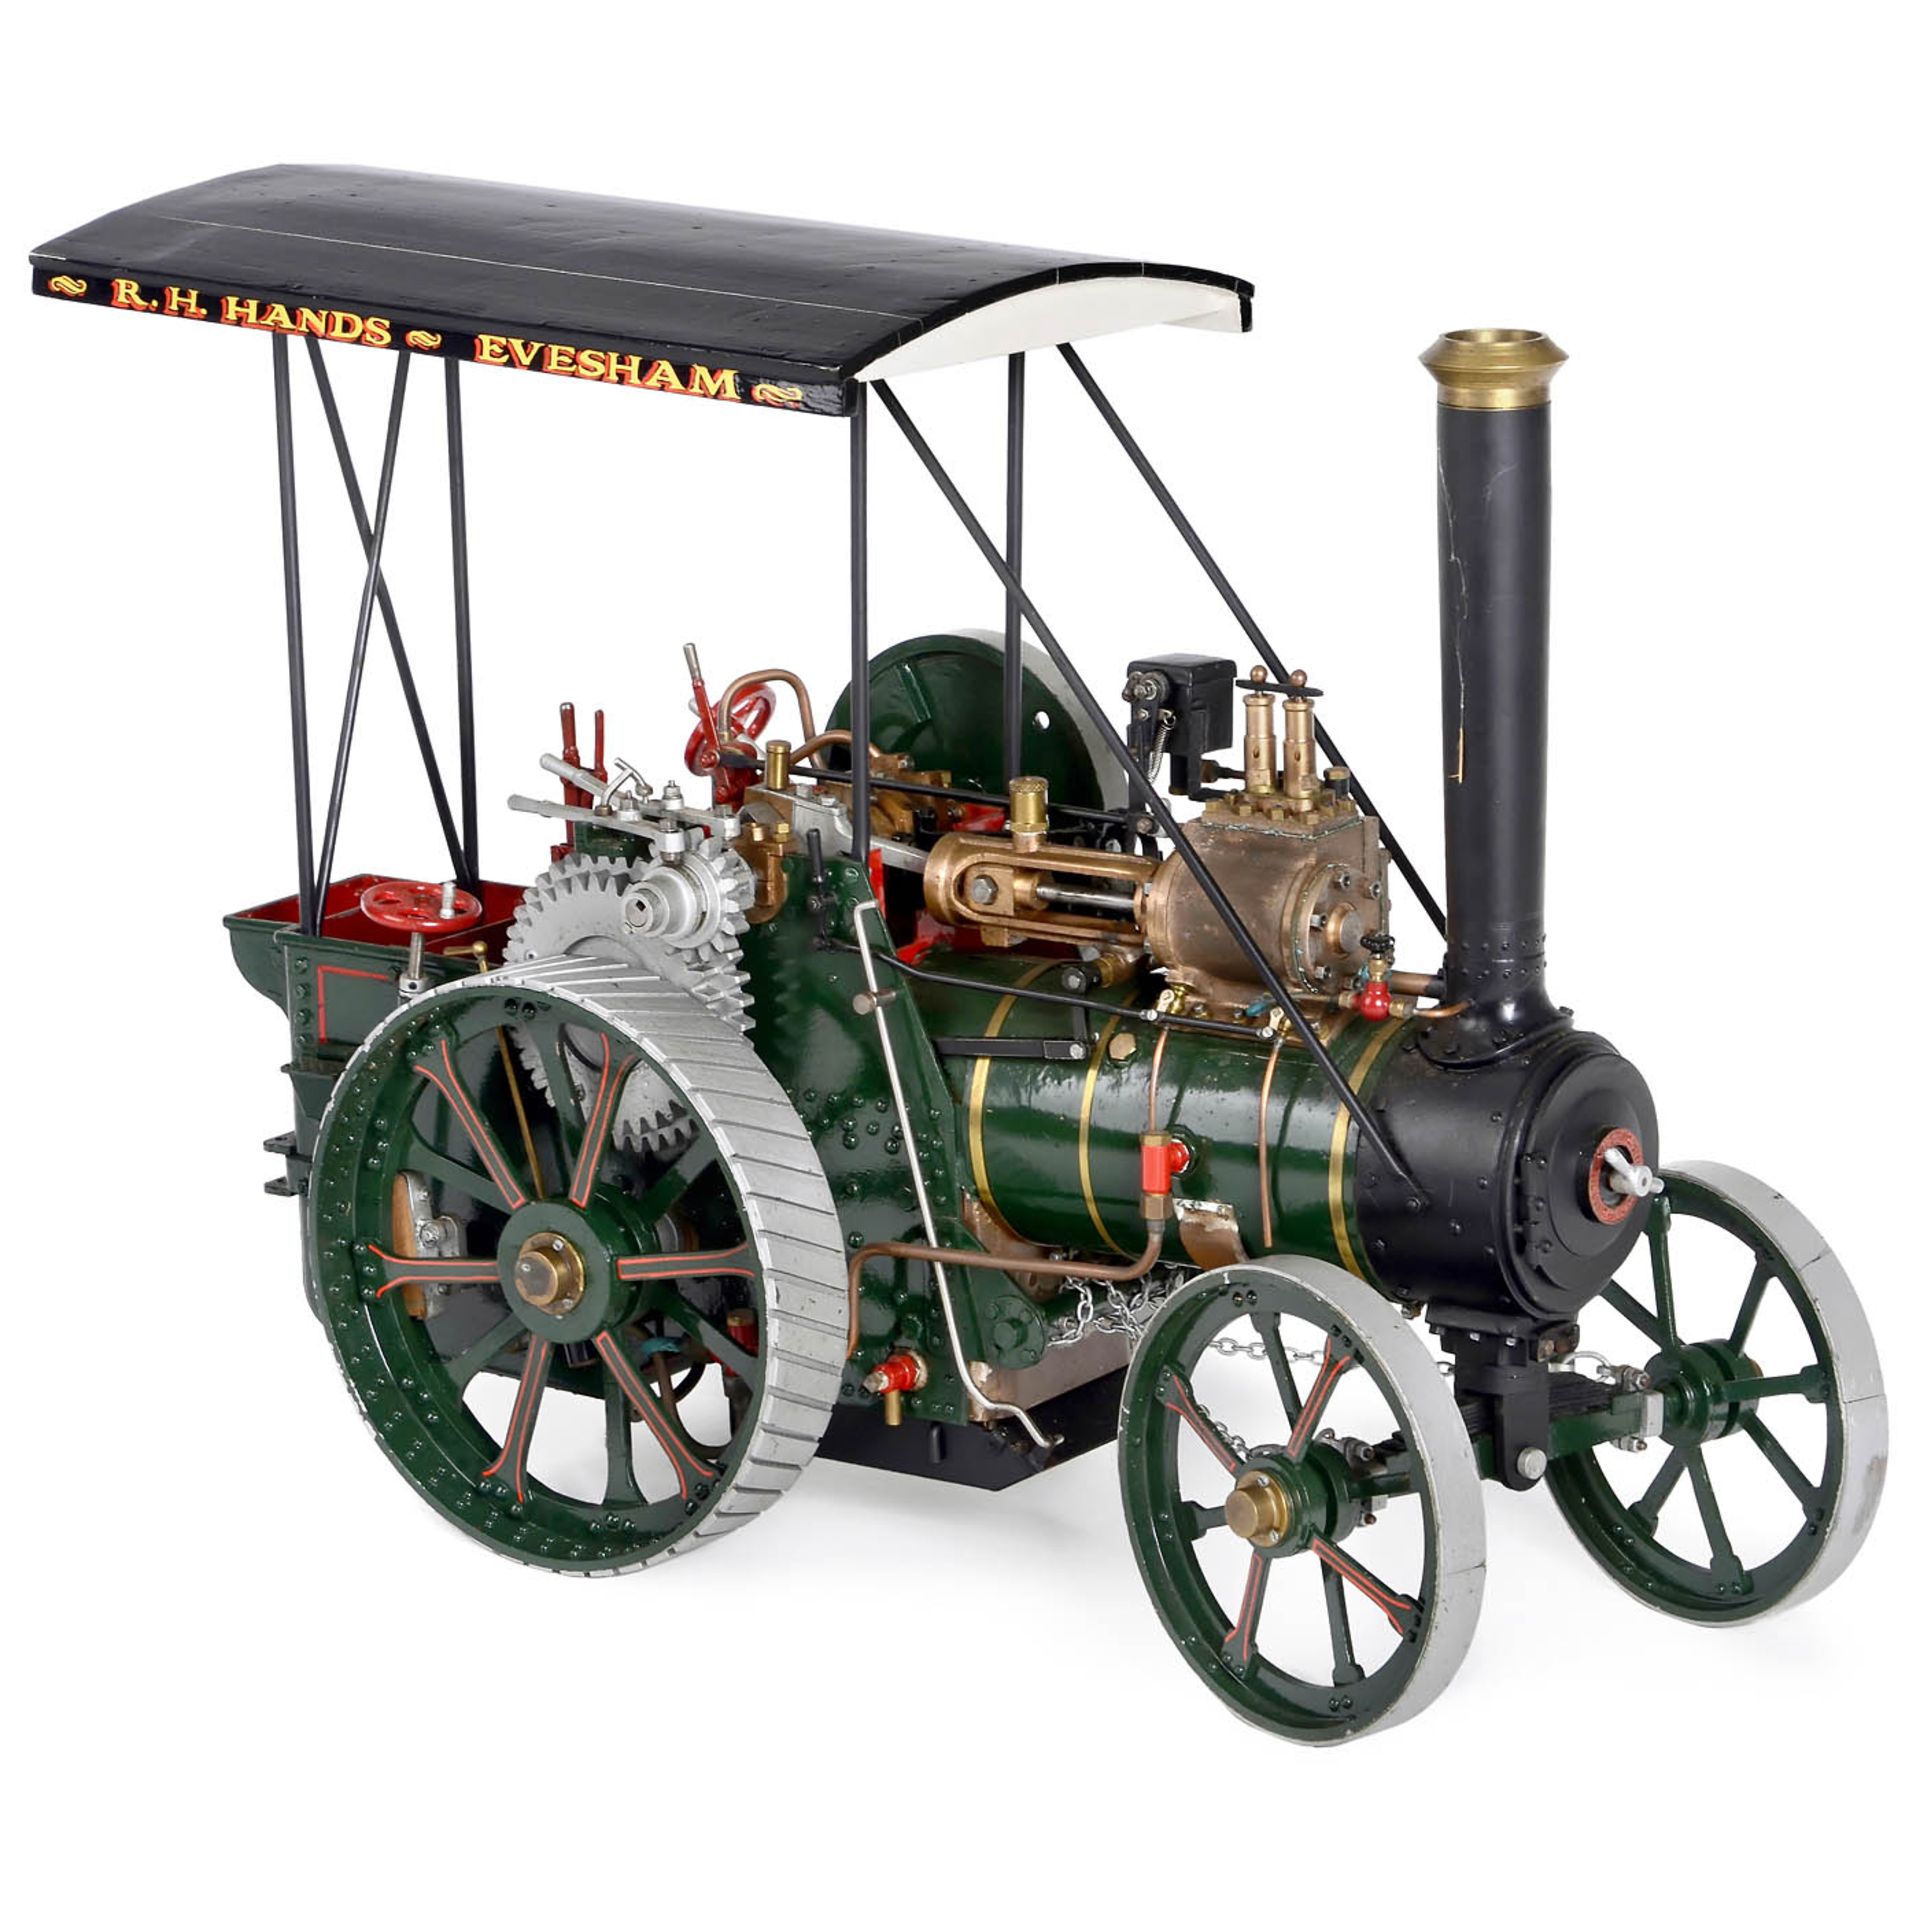 Model of a British Single-Cylinder Live Steam Traction Engine with Rope Winch, c. 1970